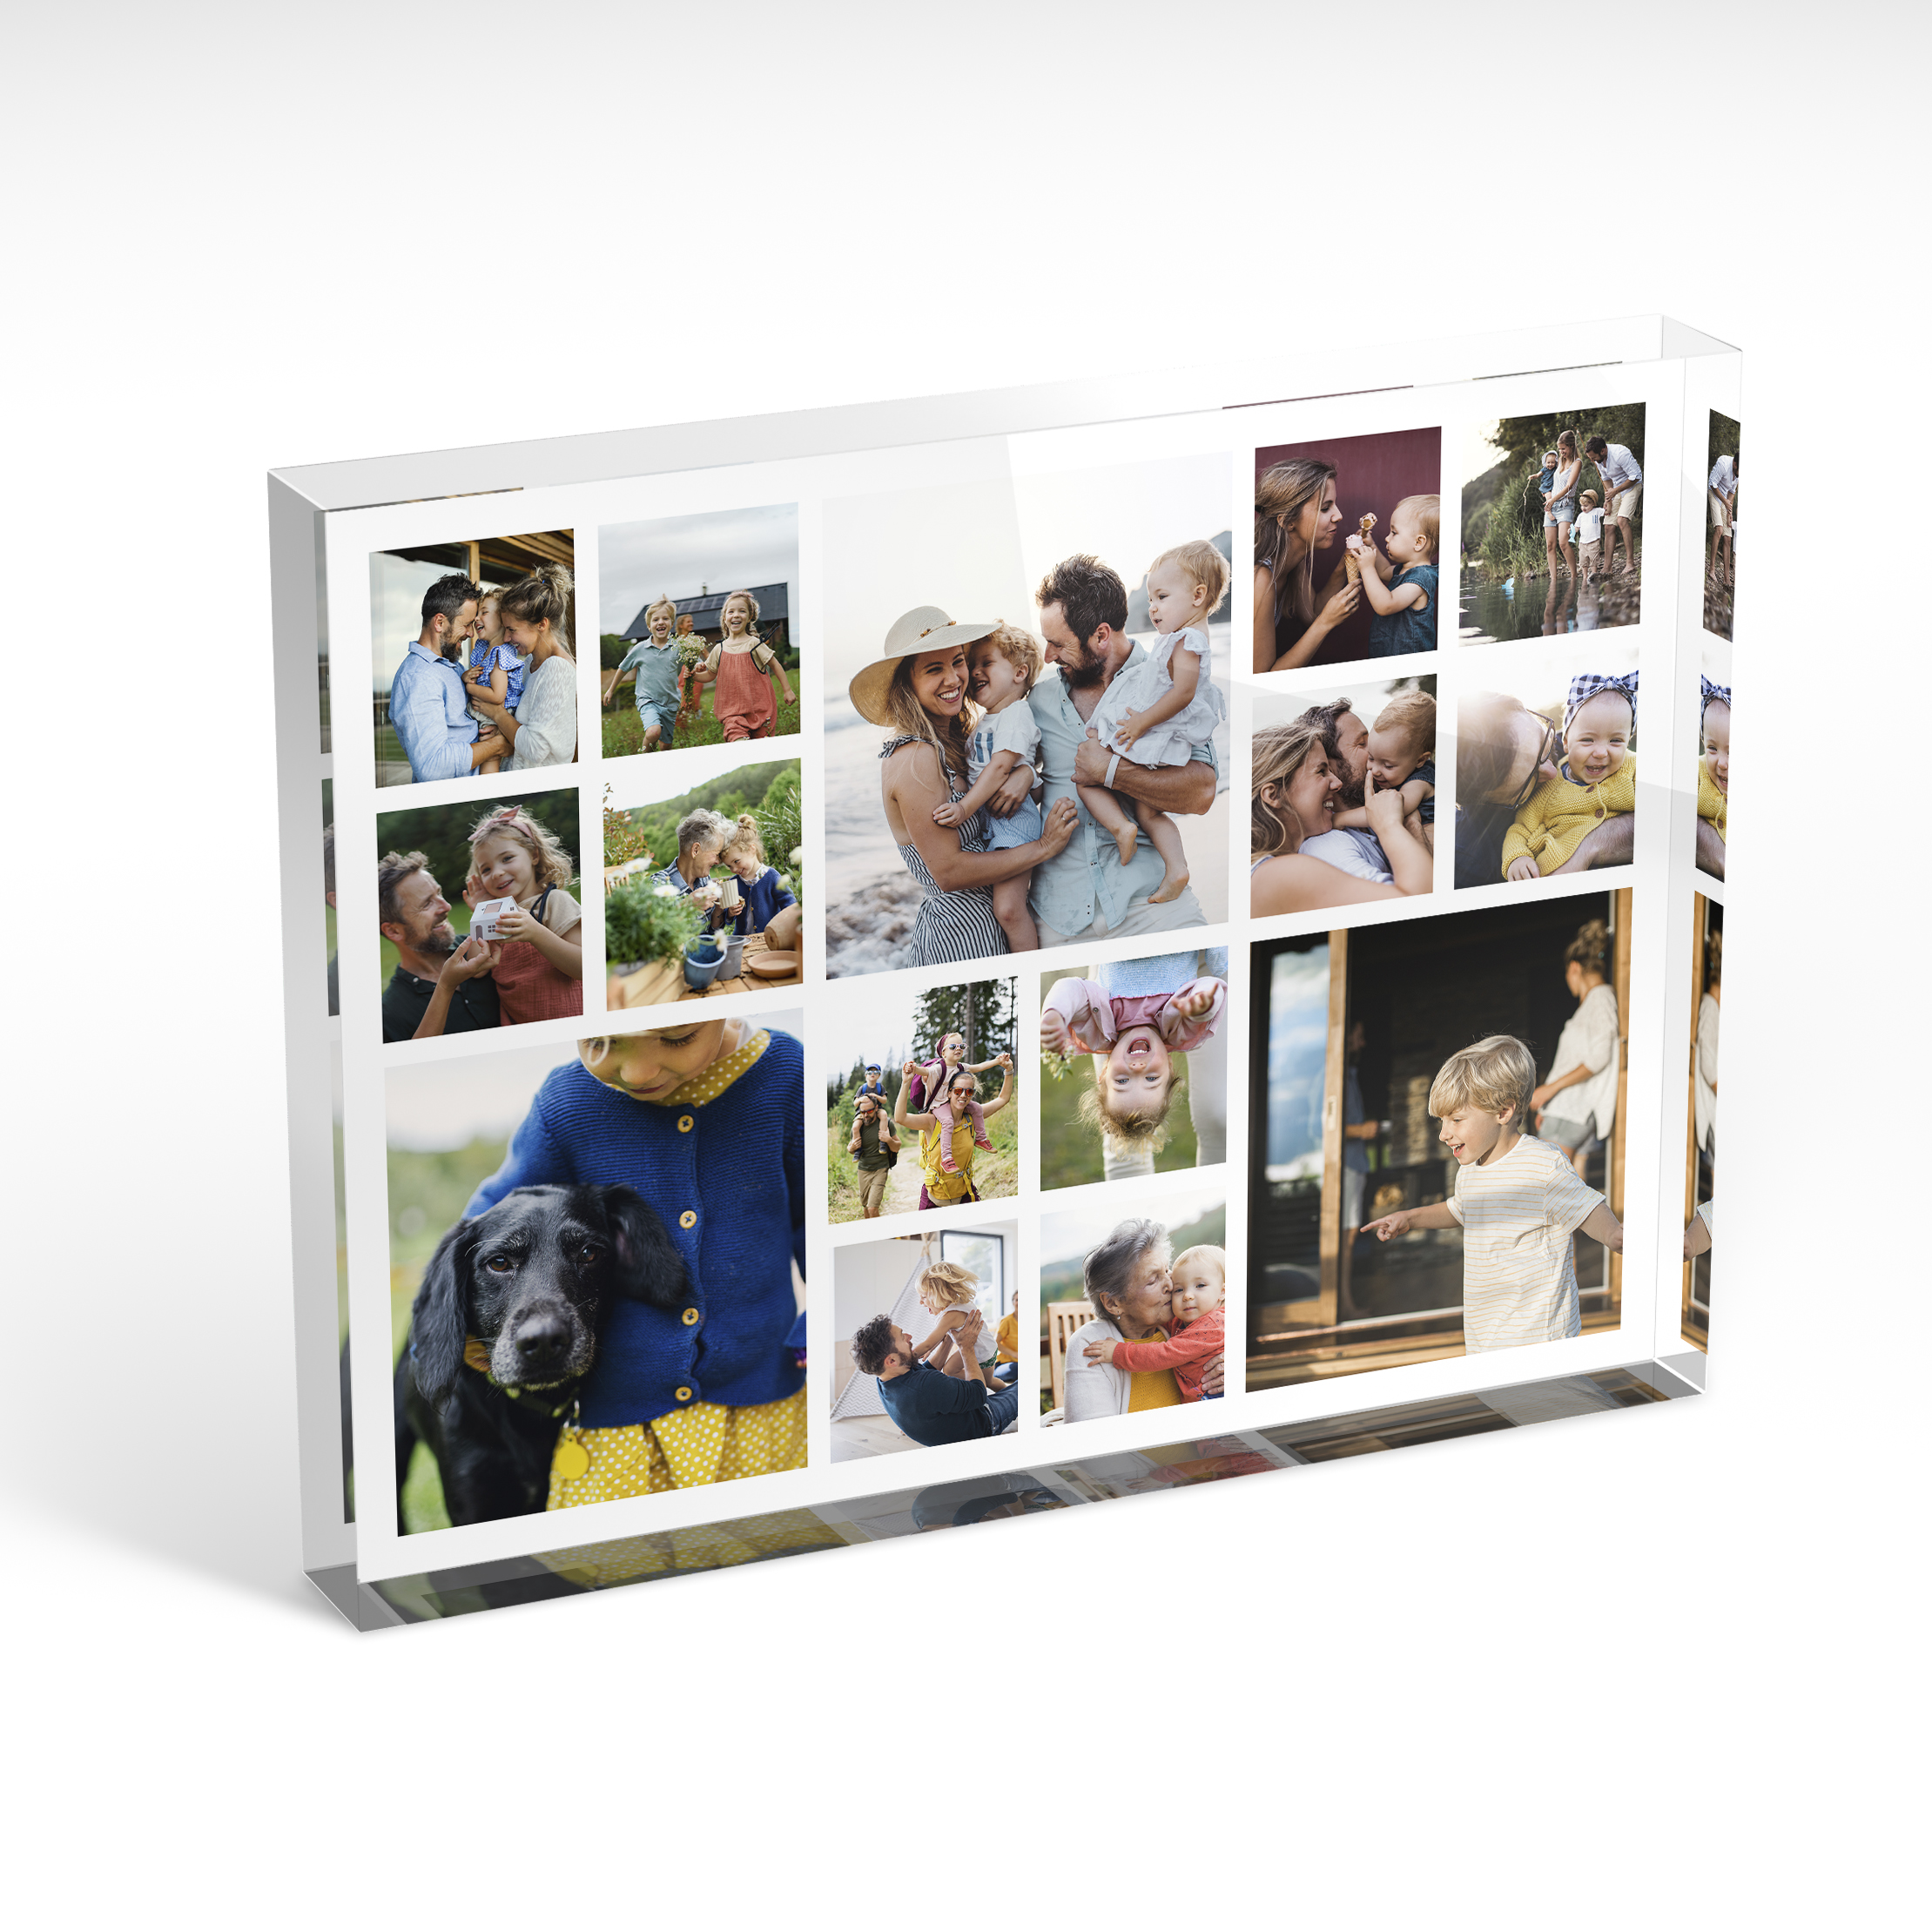 A front side view of a landscape layout Acrylic Glass Photo Block with space for 10+ photos. Thiis design is named 'Memories Overload'. 